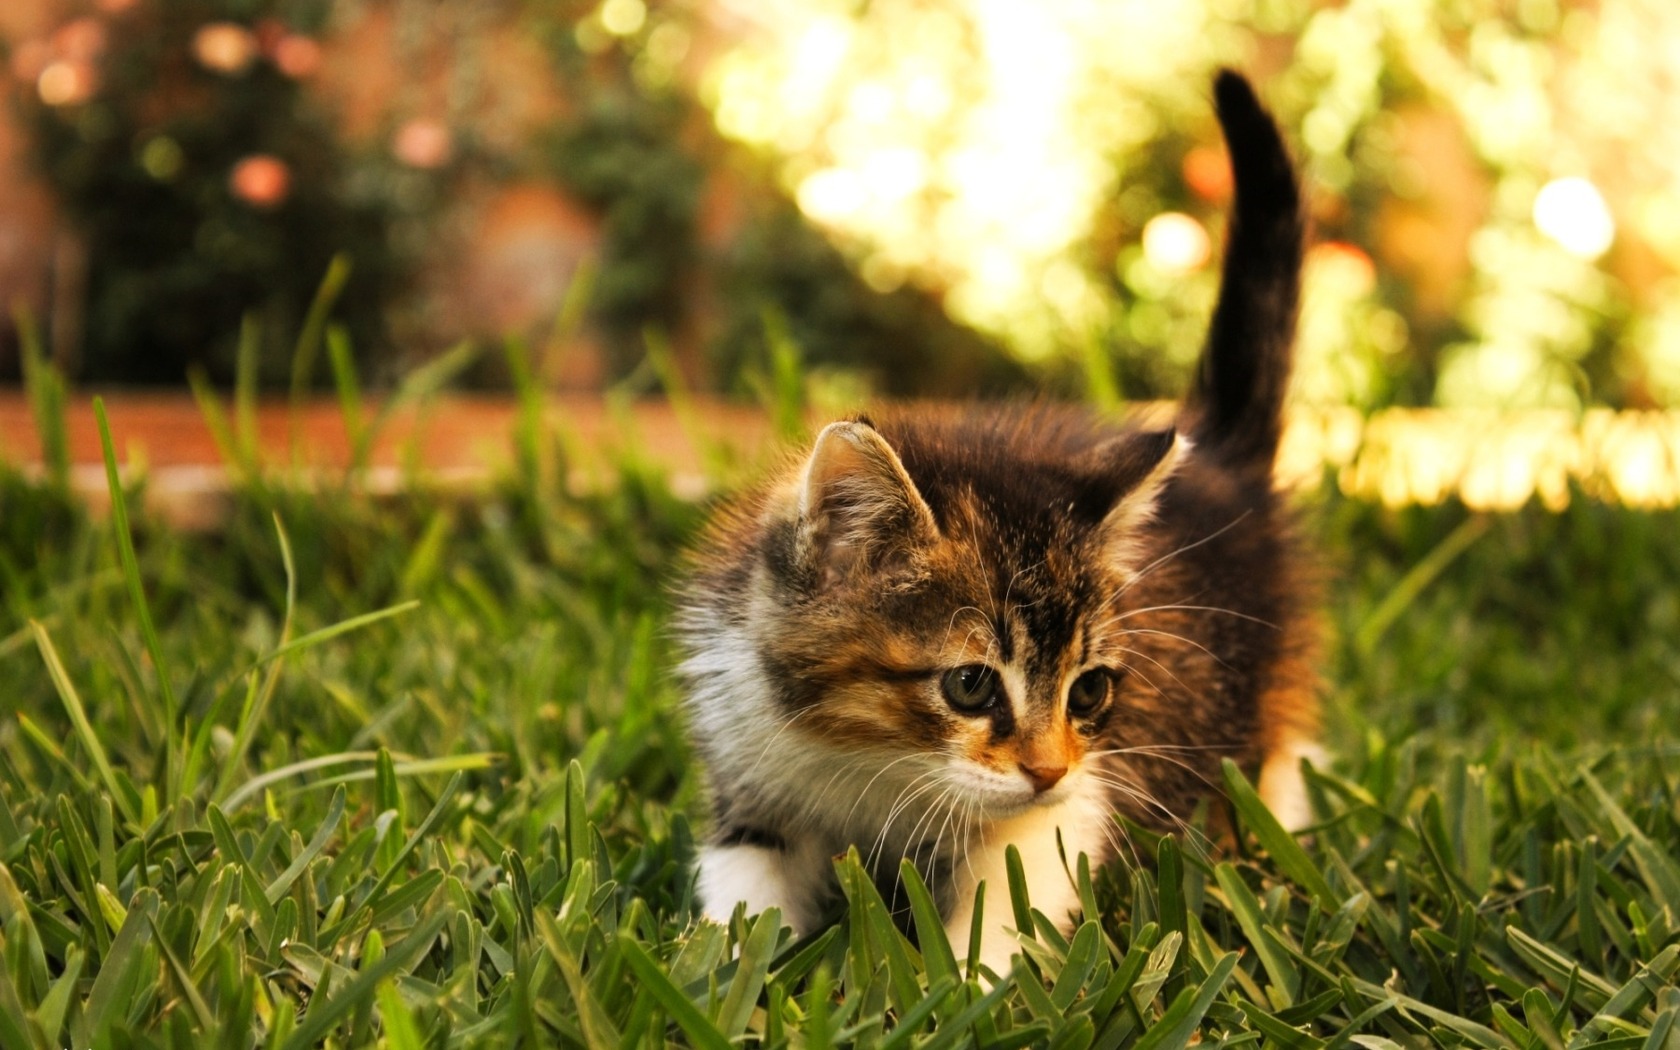 Wallpapers kitten playing on the grass on the desktop